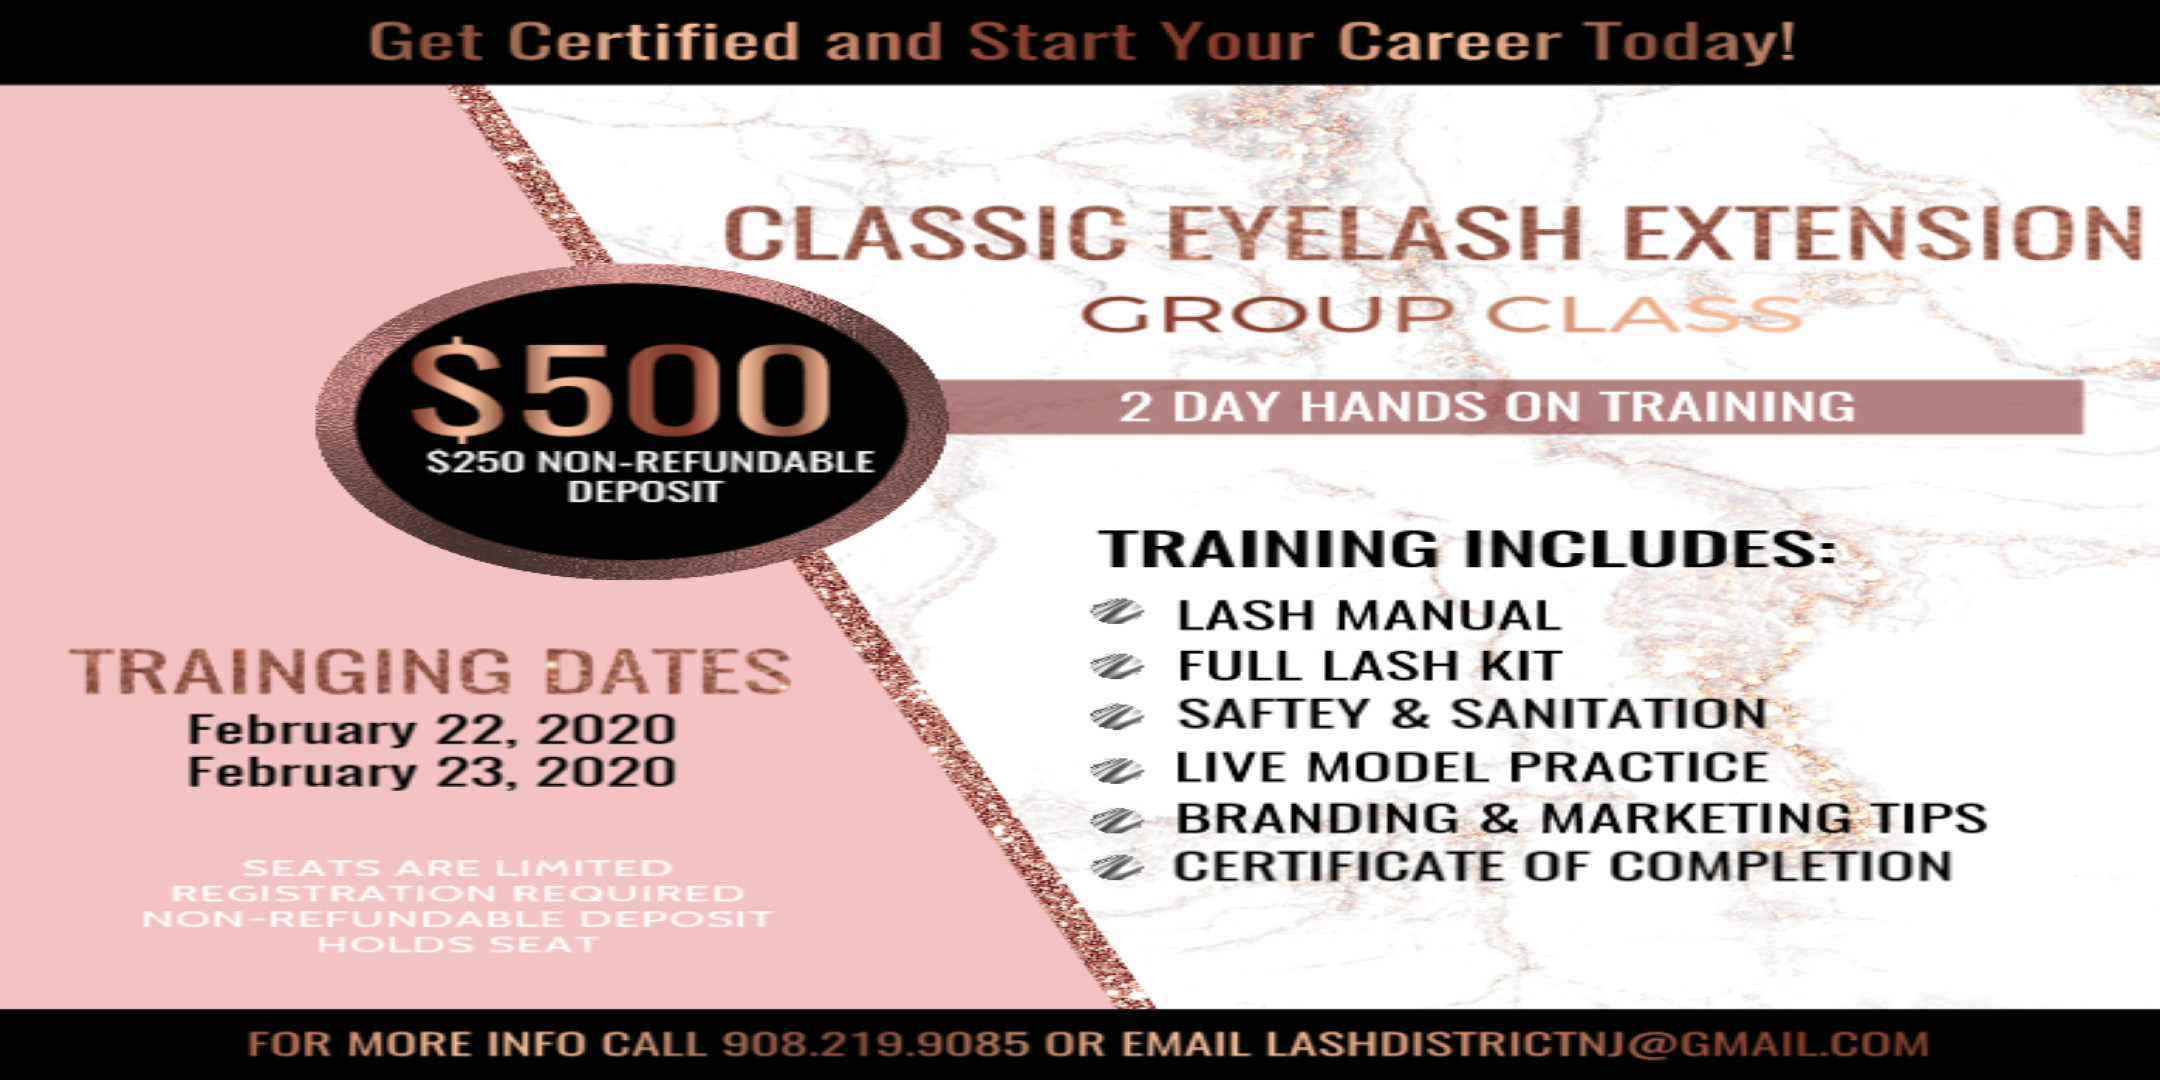 Classic Eyelash Extension Class | 2 Day Hands on Training